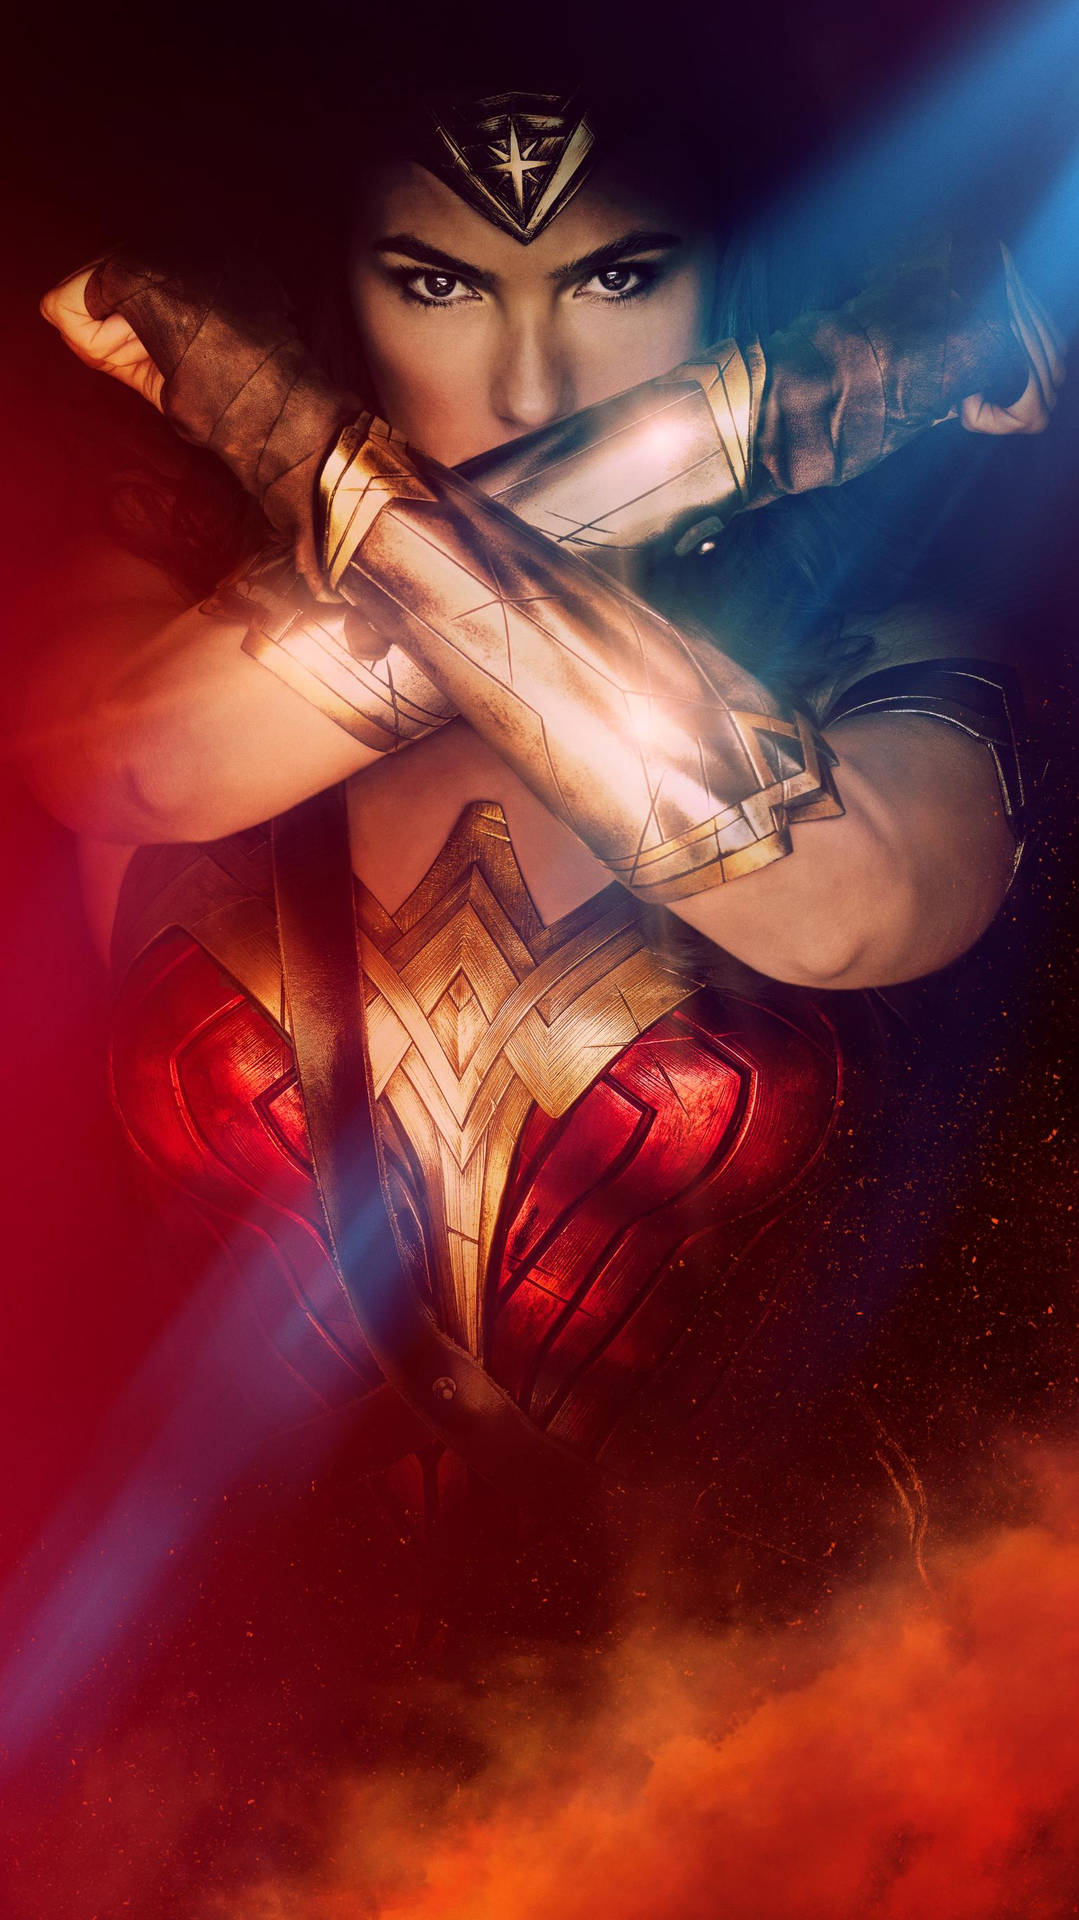 Wonder Woman rising from a smoky red mist Wallpaper